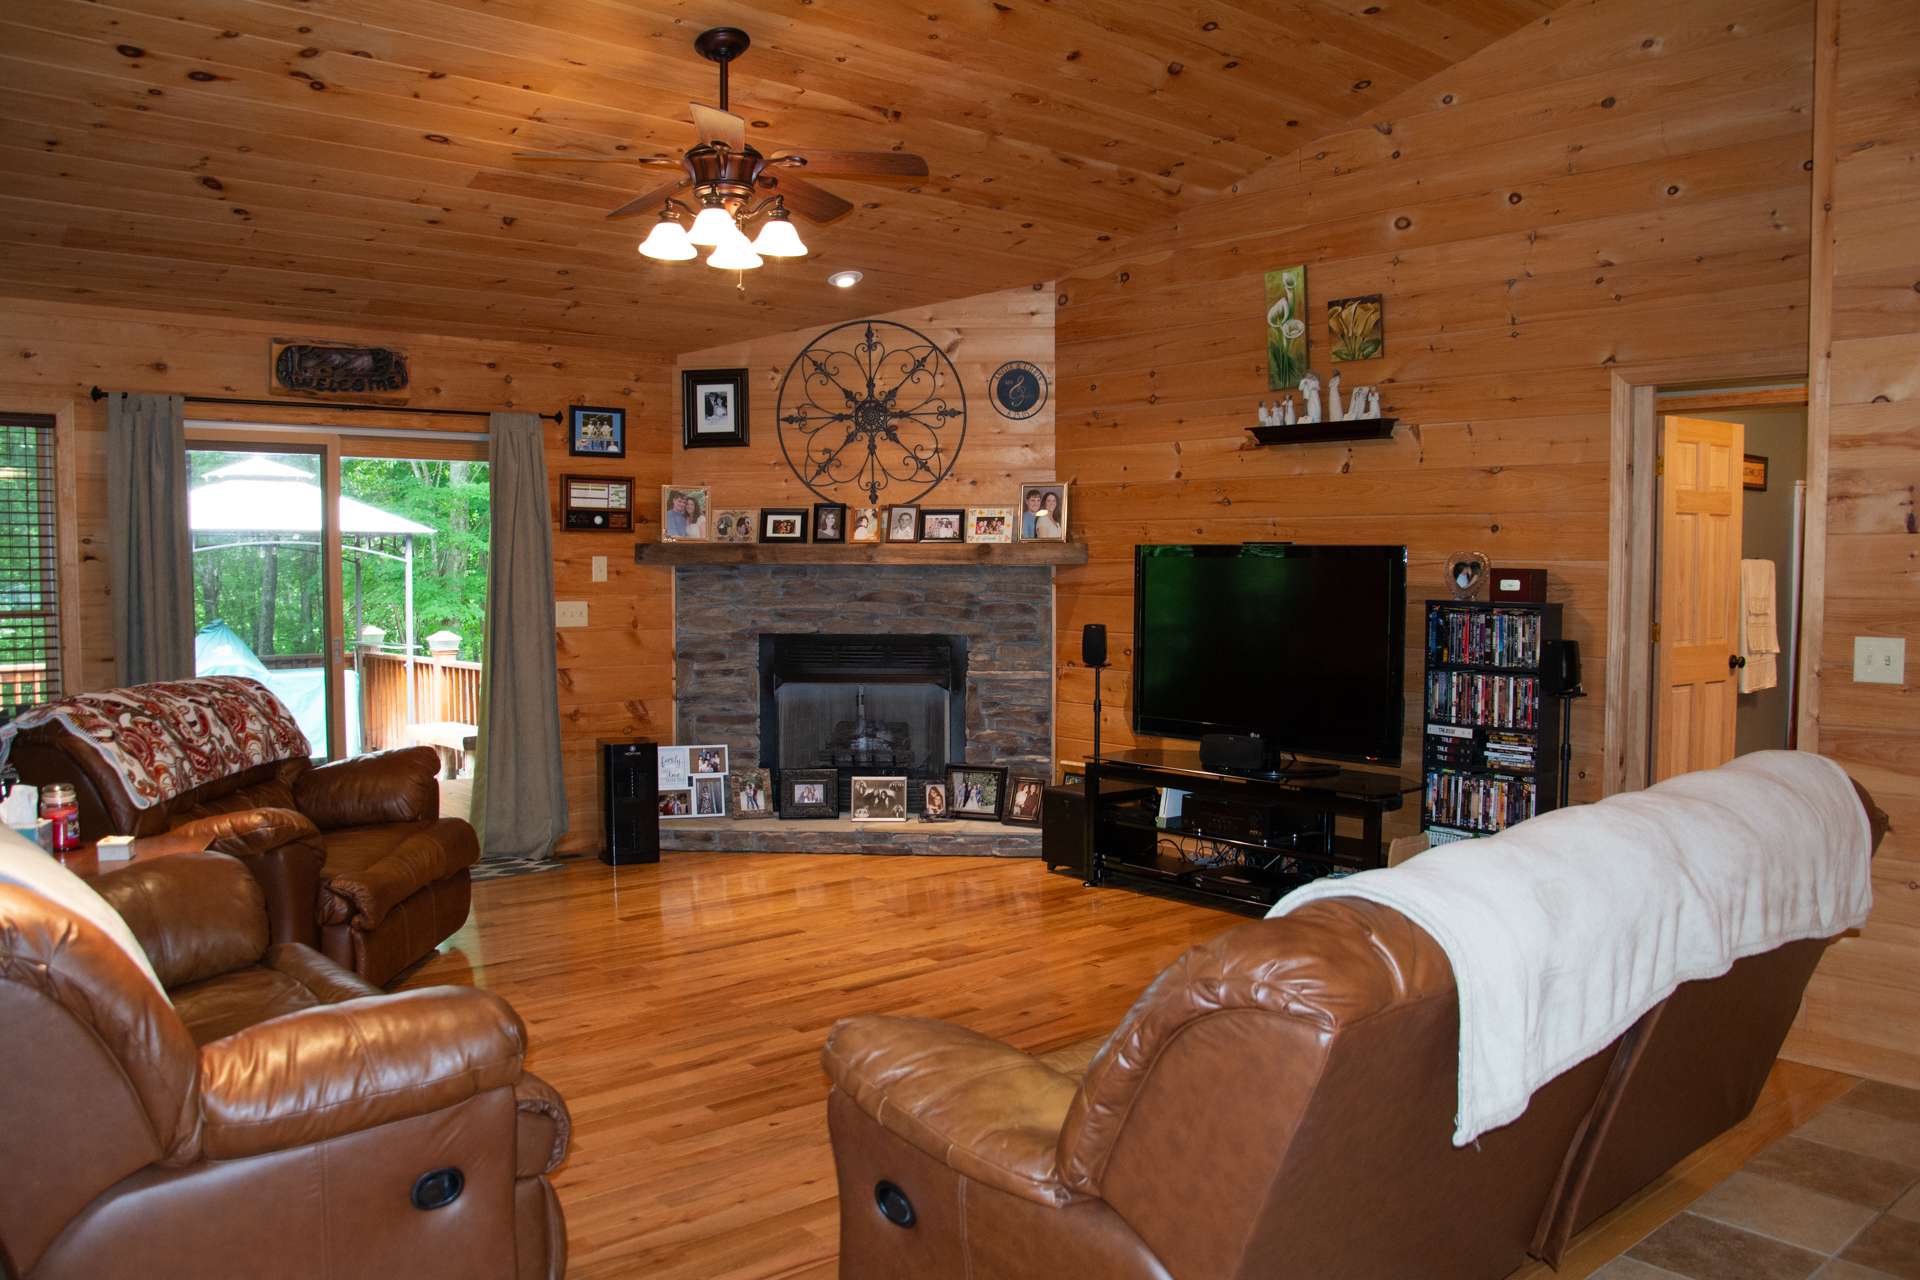 The open great room features a vaulted wood ceiling, gleaming wood floors, and a stone fireplace with gas logs to warm up those chilly winter evenings.